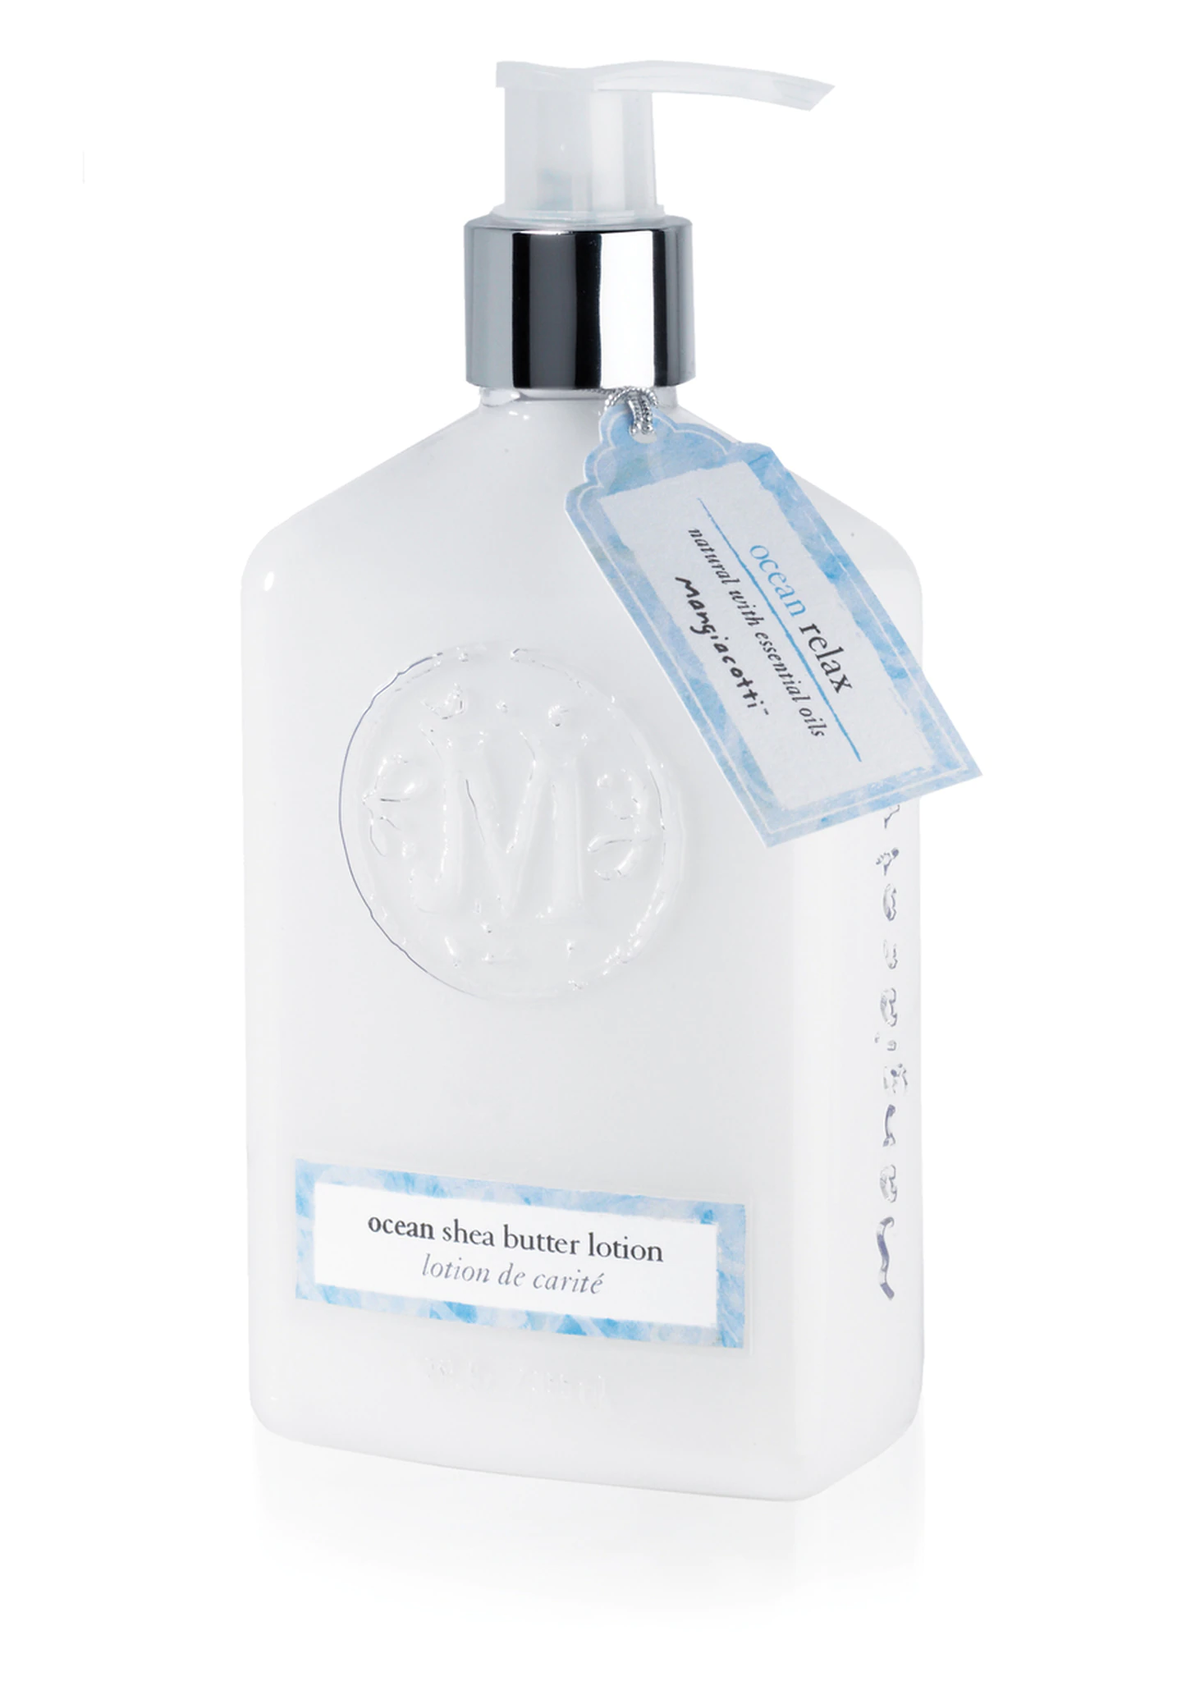 Transparent pump bottle of Mangiacotti Ocean Shea Butter Lotion with readable labels, isolated on a white background.